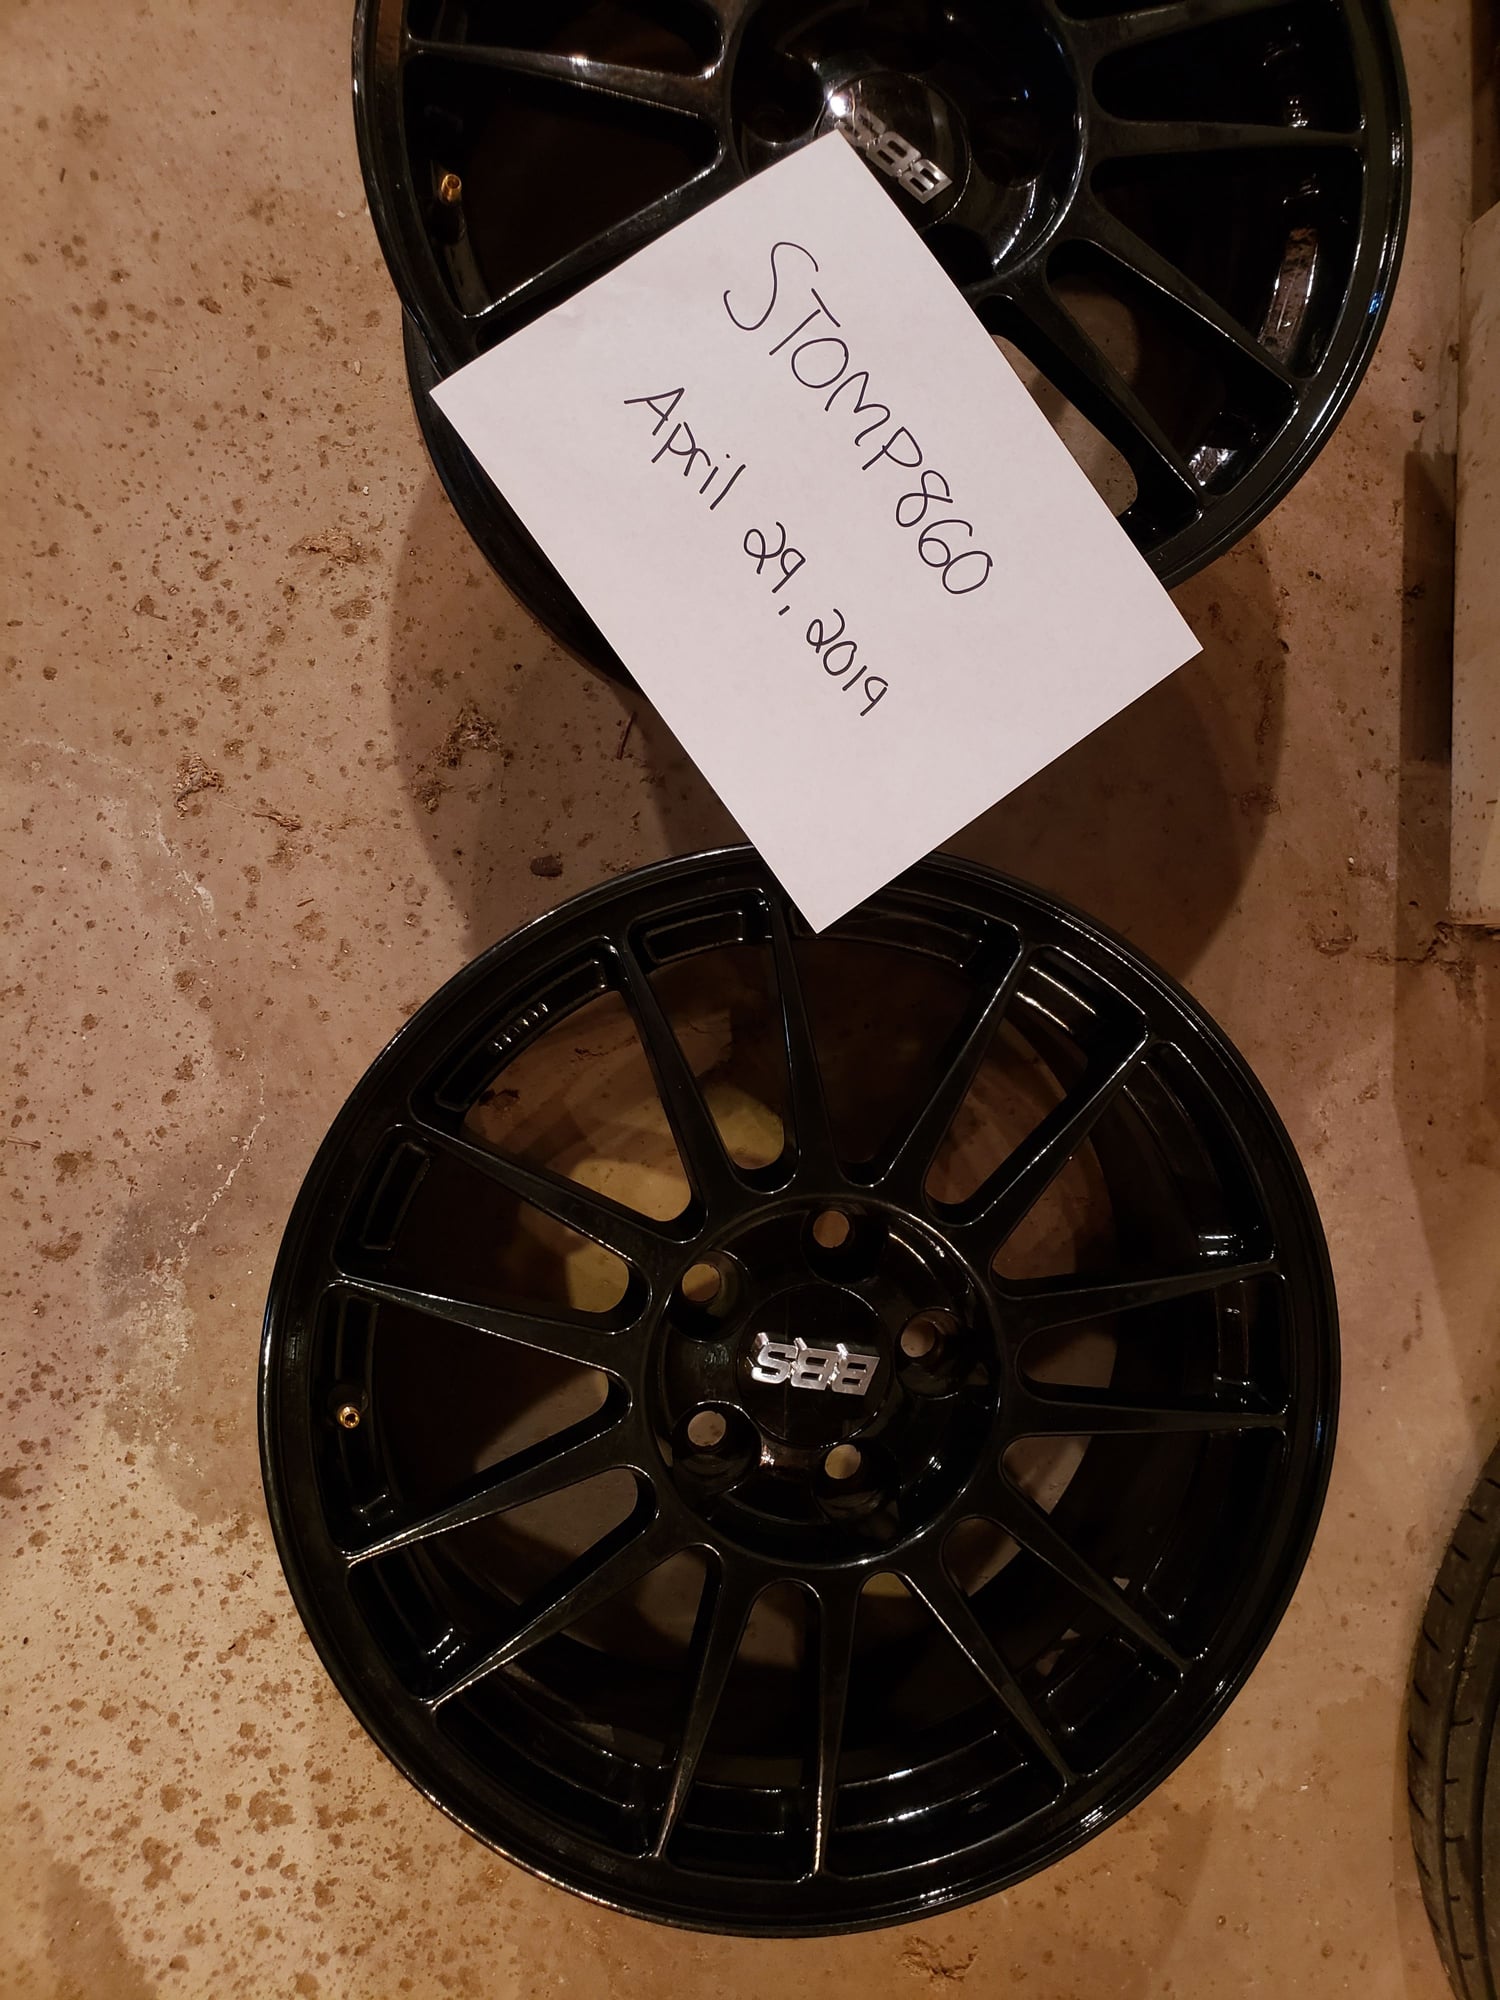 Wheels and Tires/Axles - Evo 9 BBS Wheels - Used - Vernon Rockville, CT 06066, United States